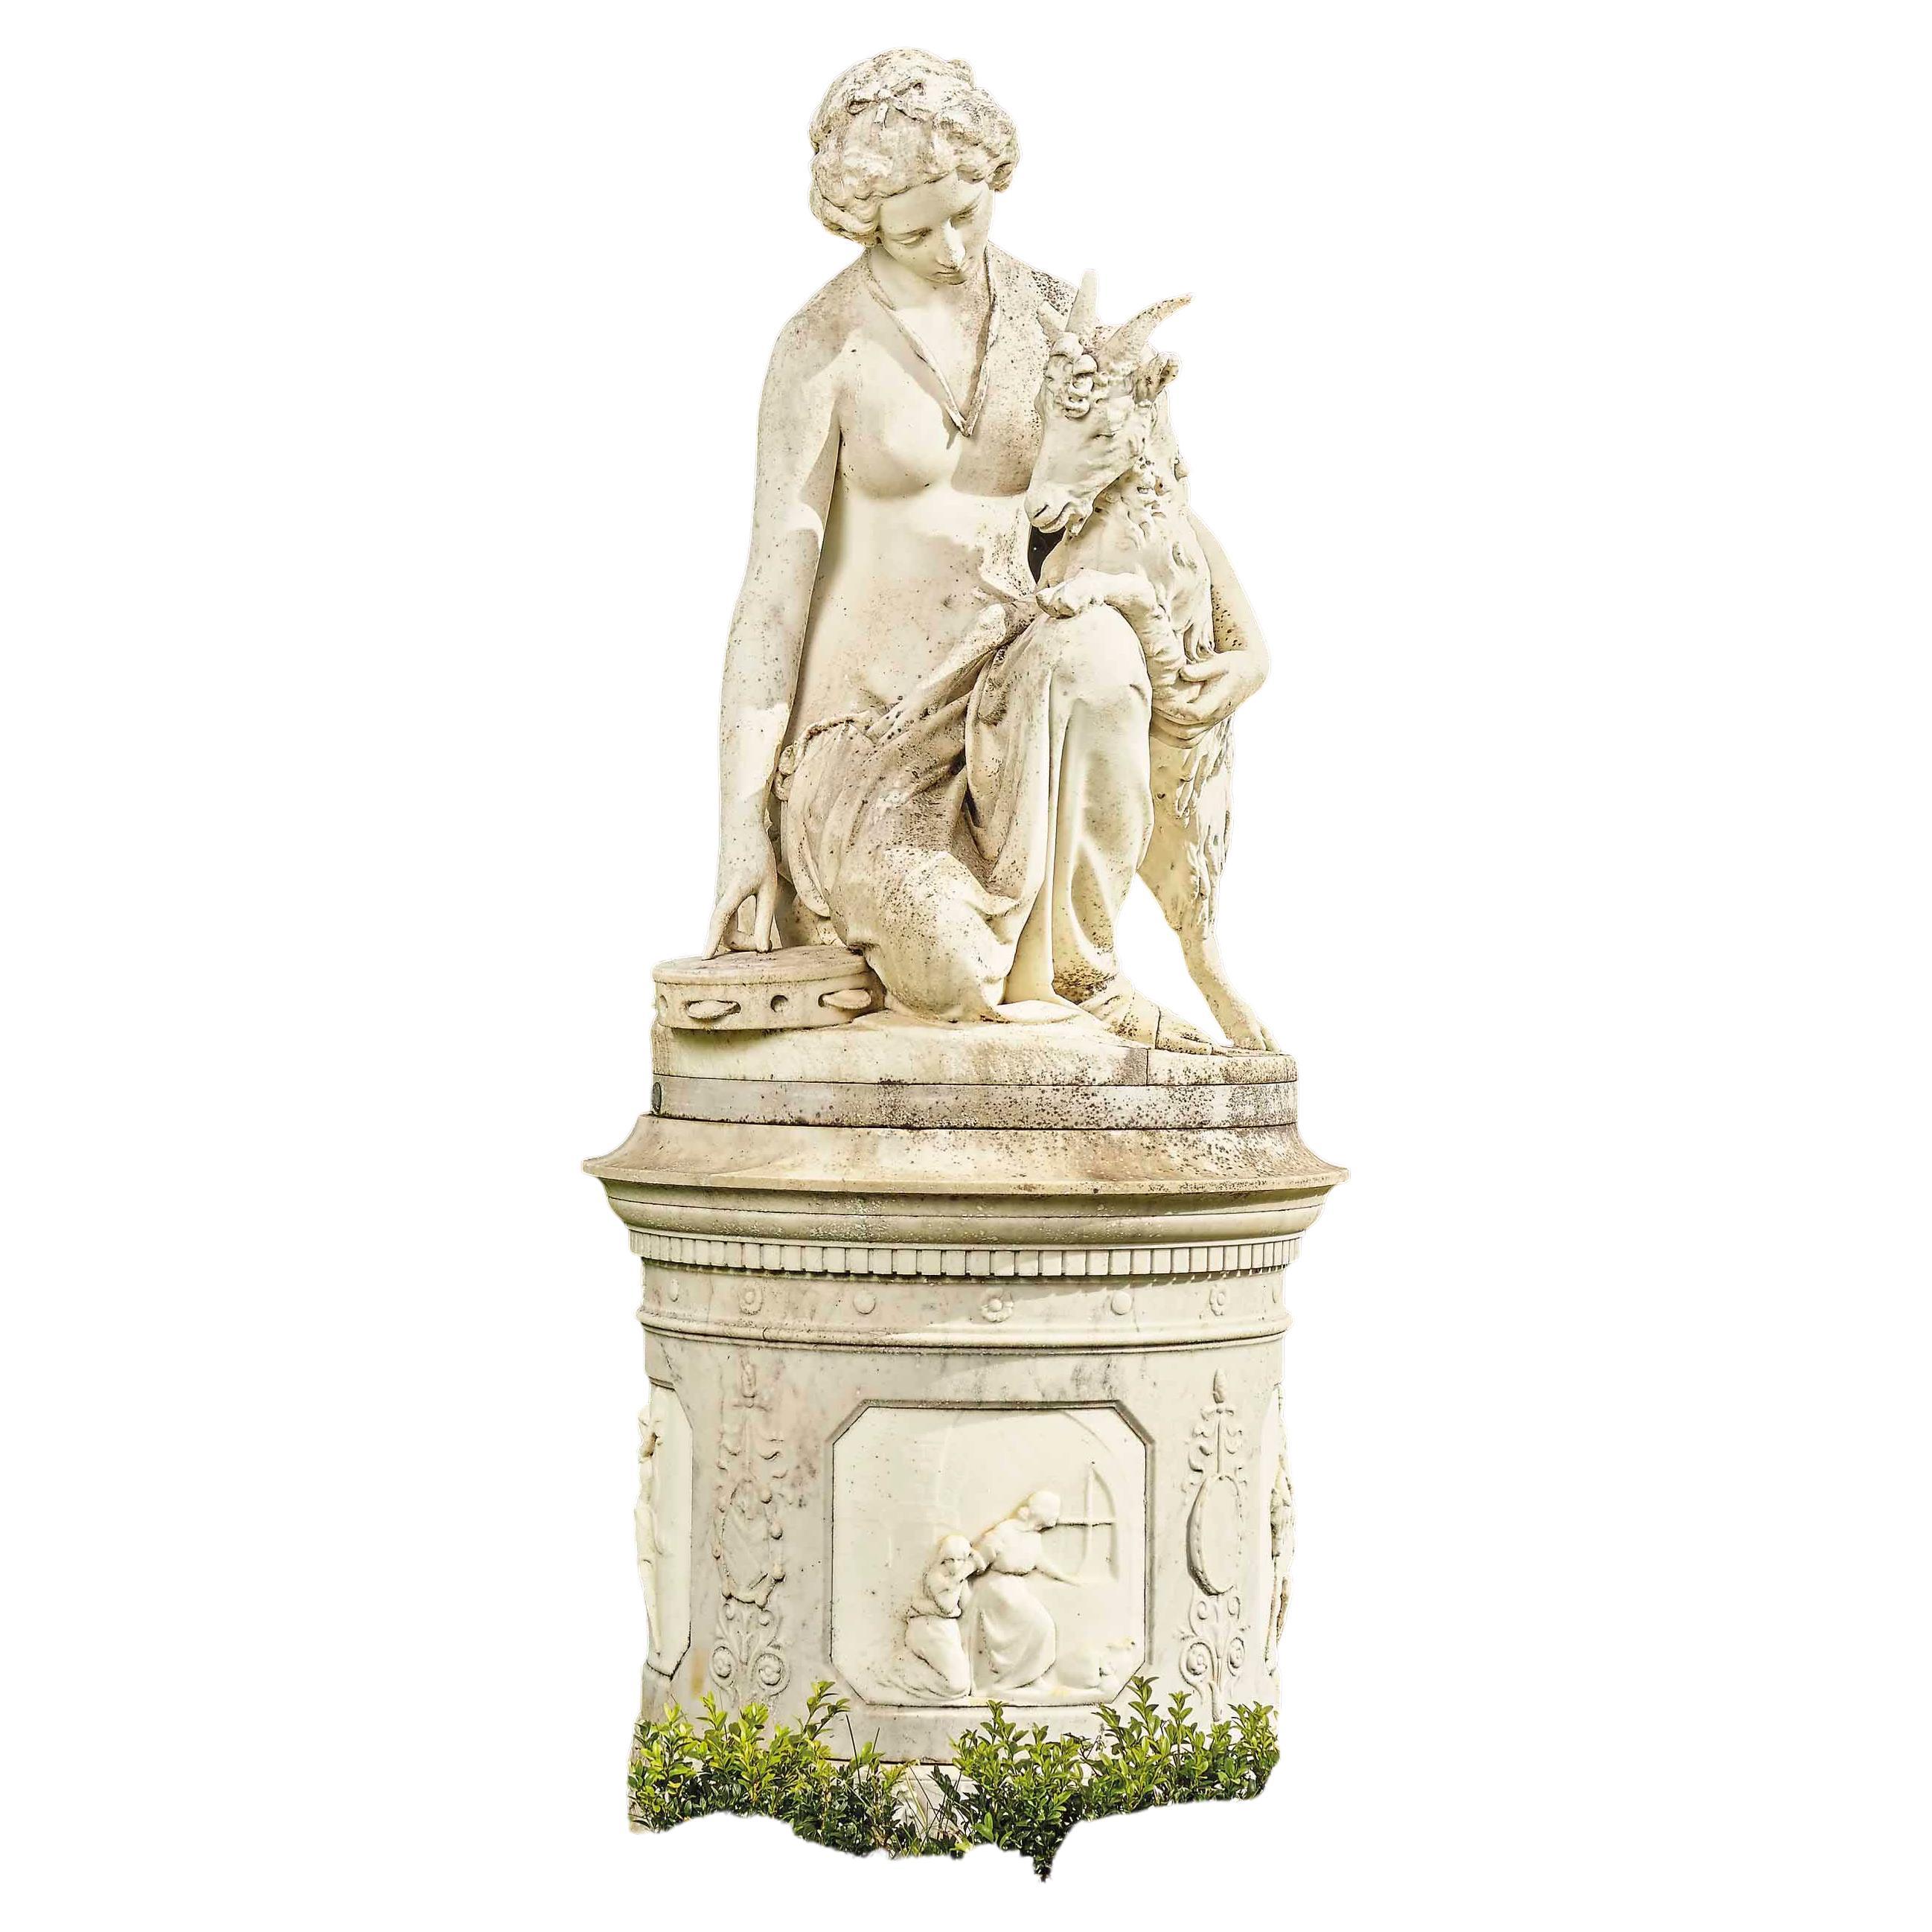 Figural Group of Esmeralda and the Goat on Pedestal, Mid-19th Century